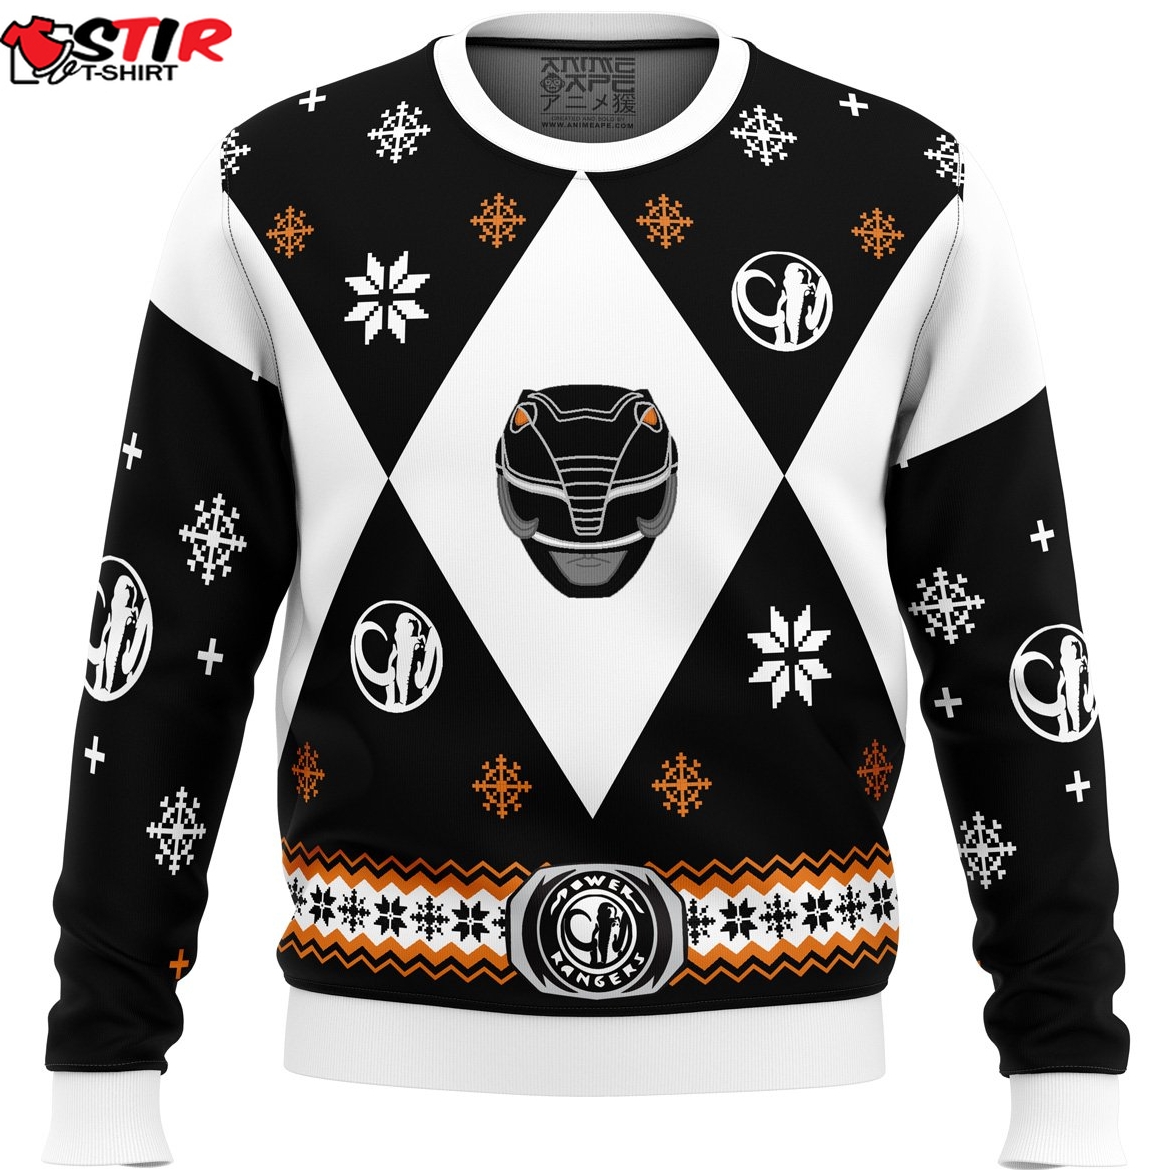 Mighty Morphin Power Rangers Black Ugly Christmas Sweater Stirtshirt